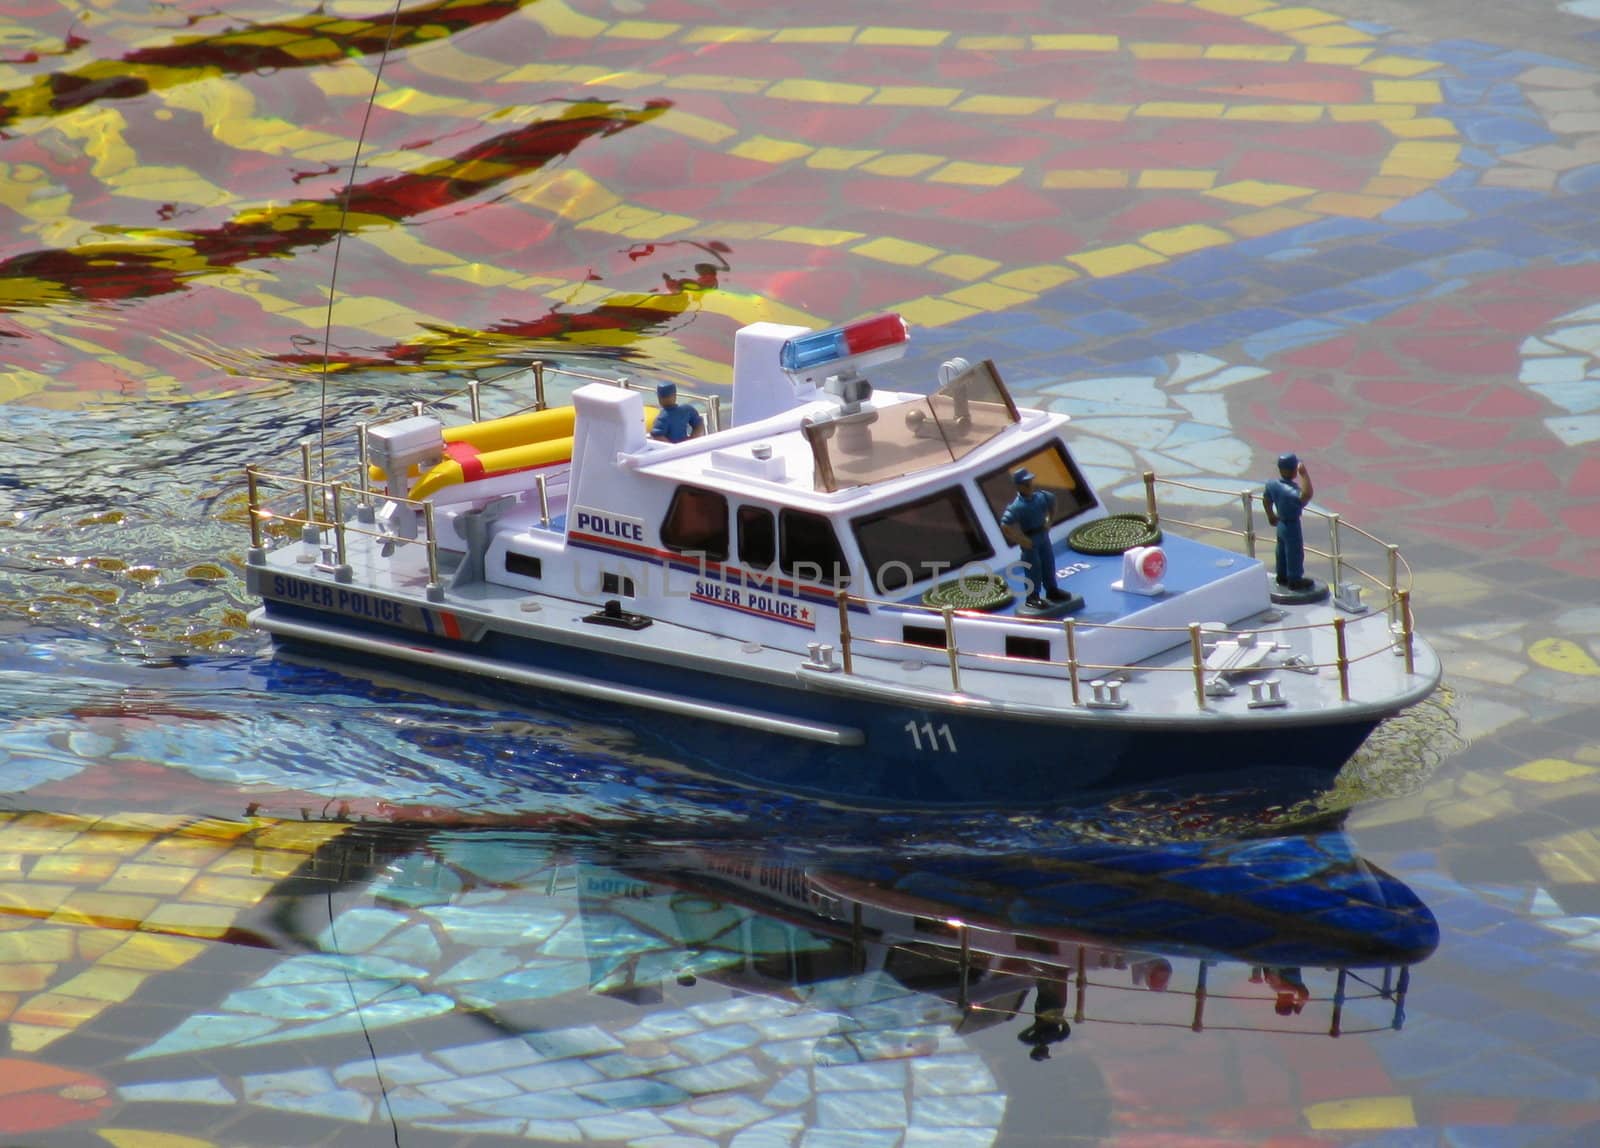 Electronic model of police-boat by SergeAT